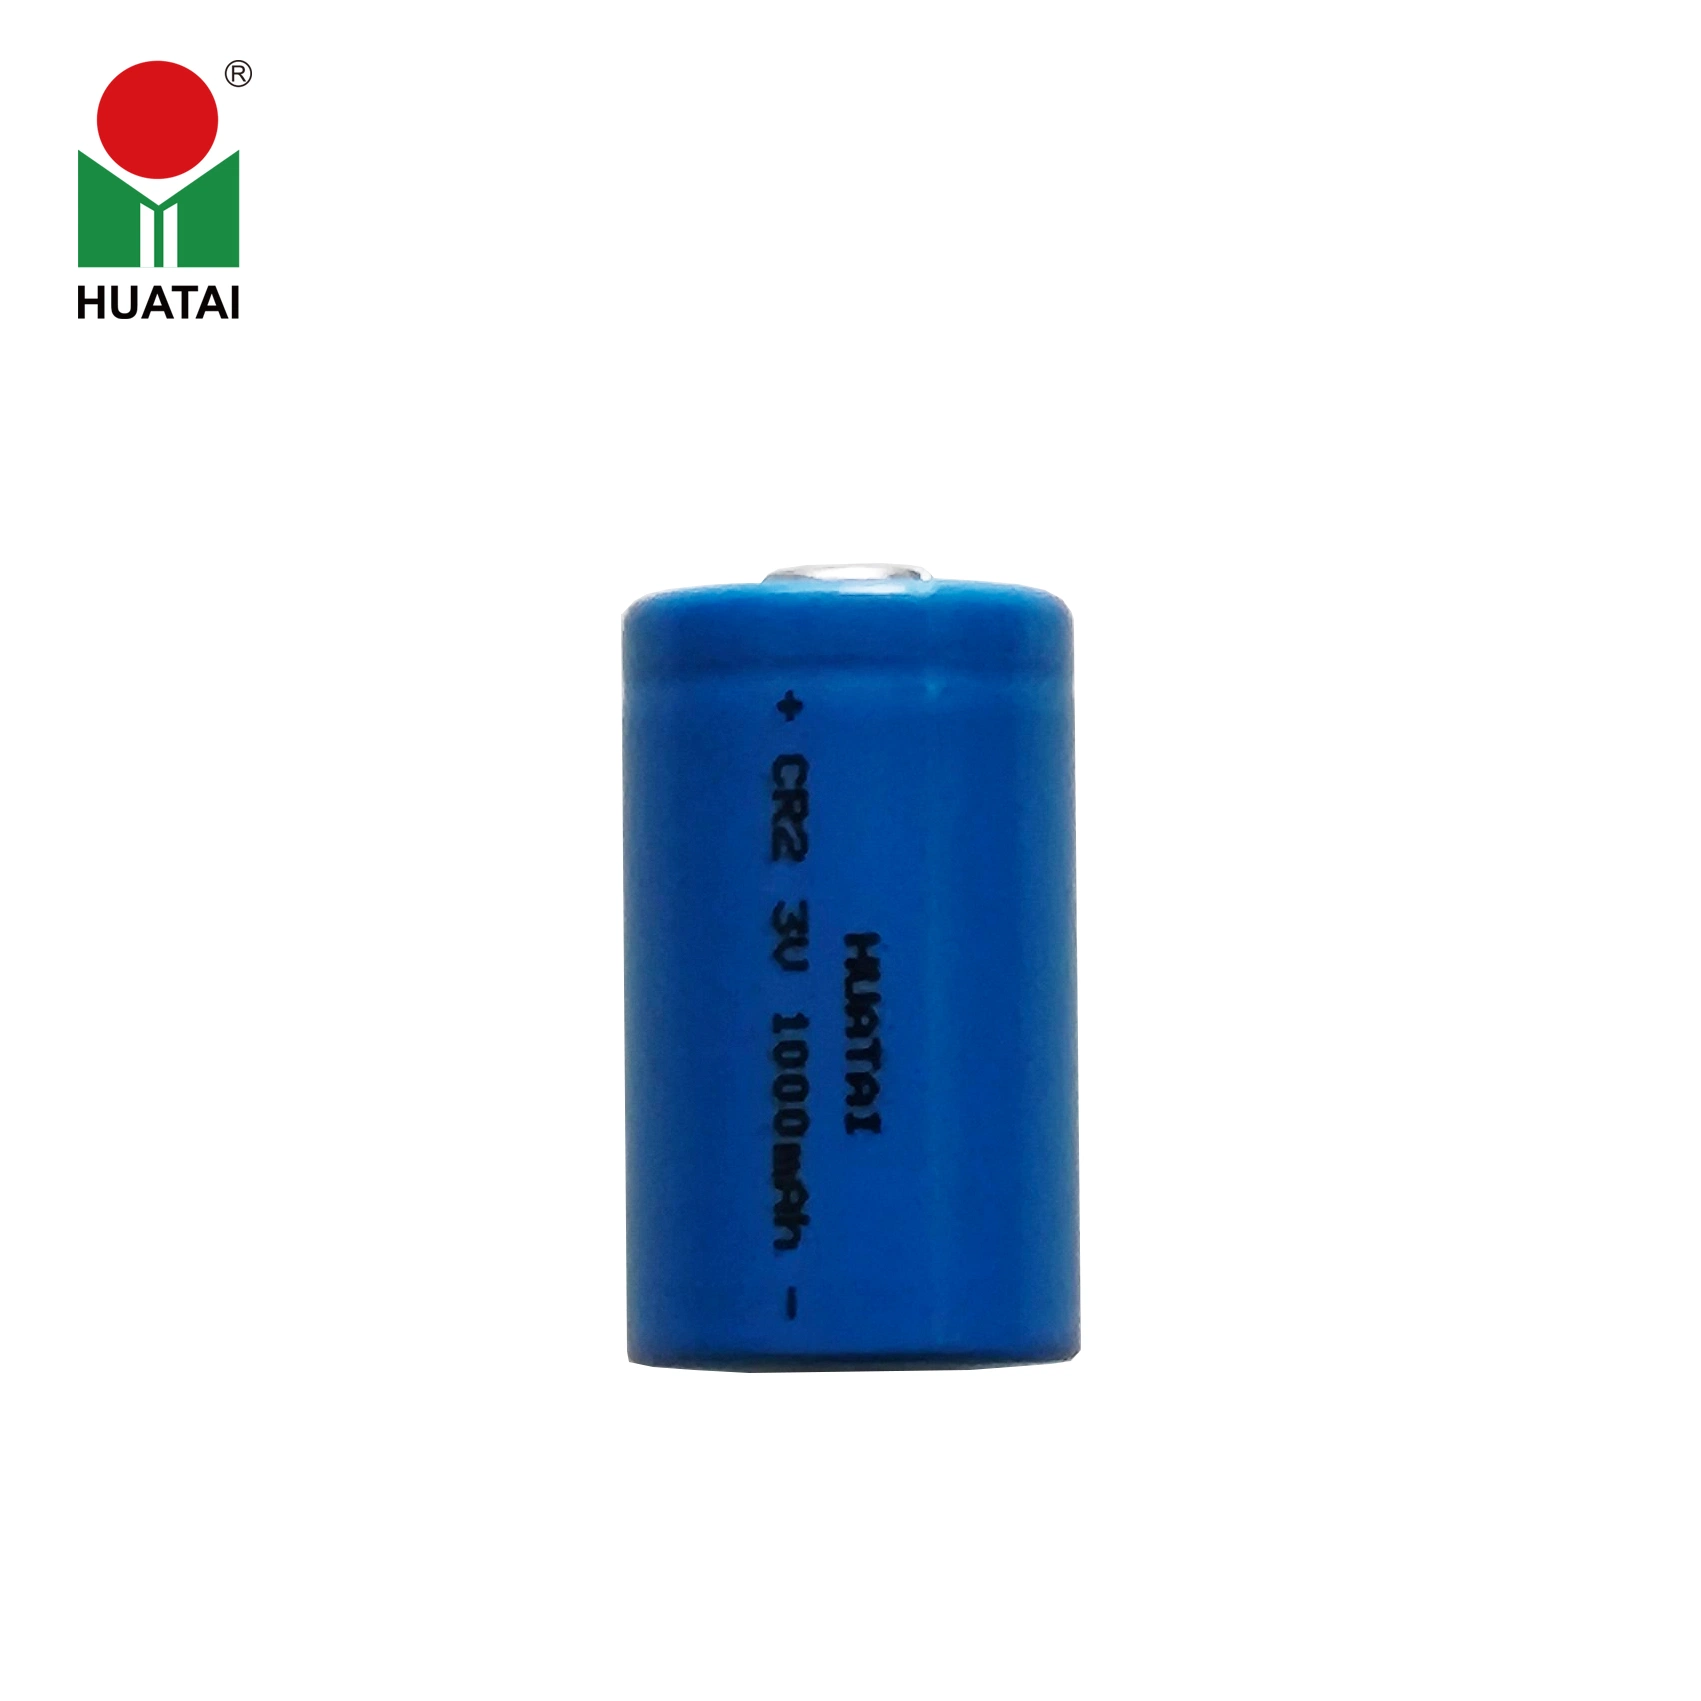 Primary Camera 3V Non-Rechargeable Lithium Battery Cr2